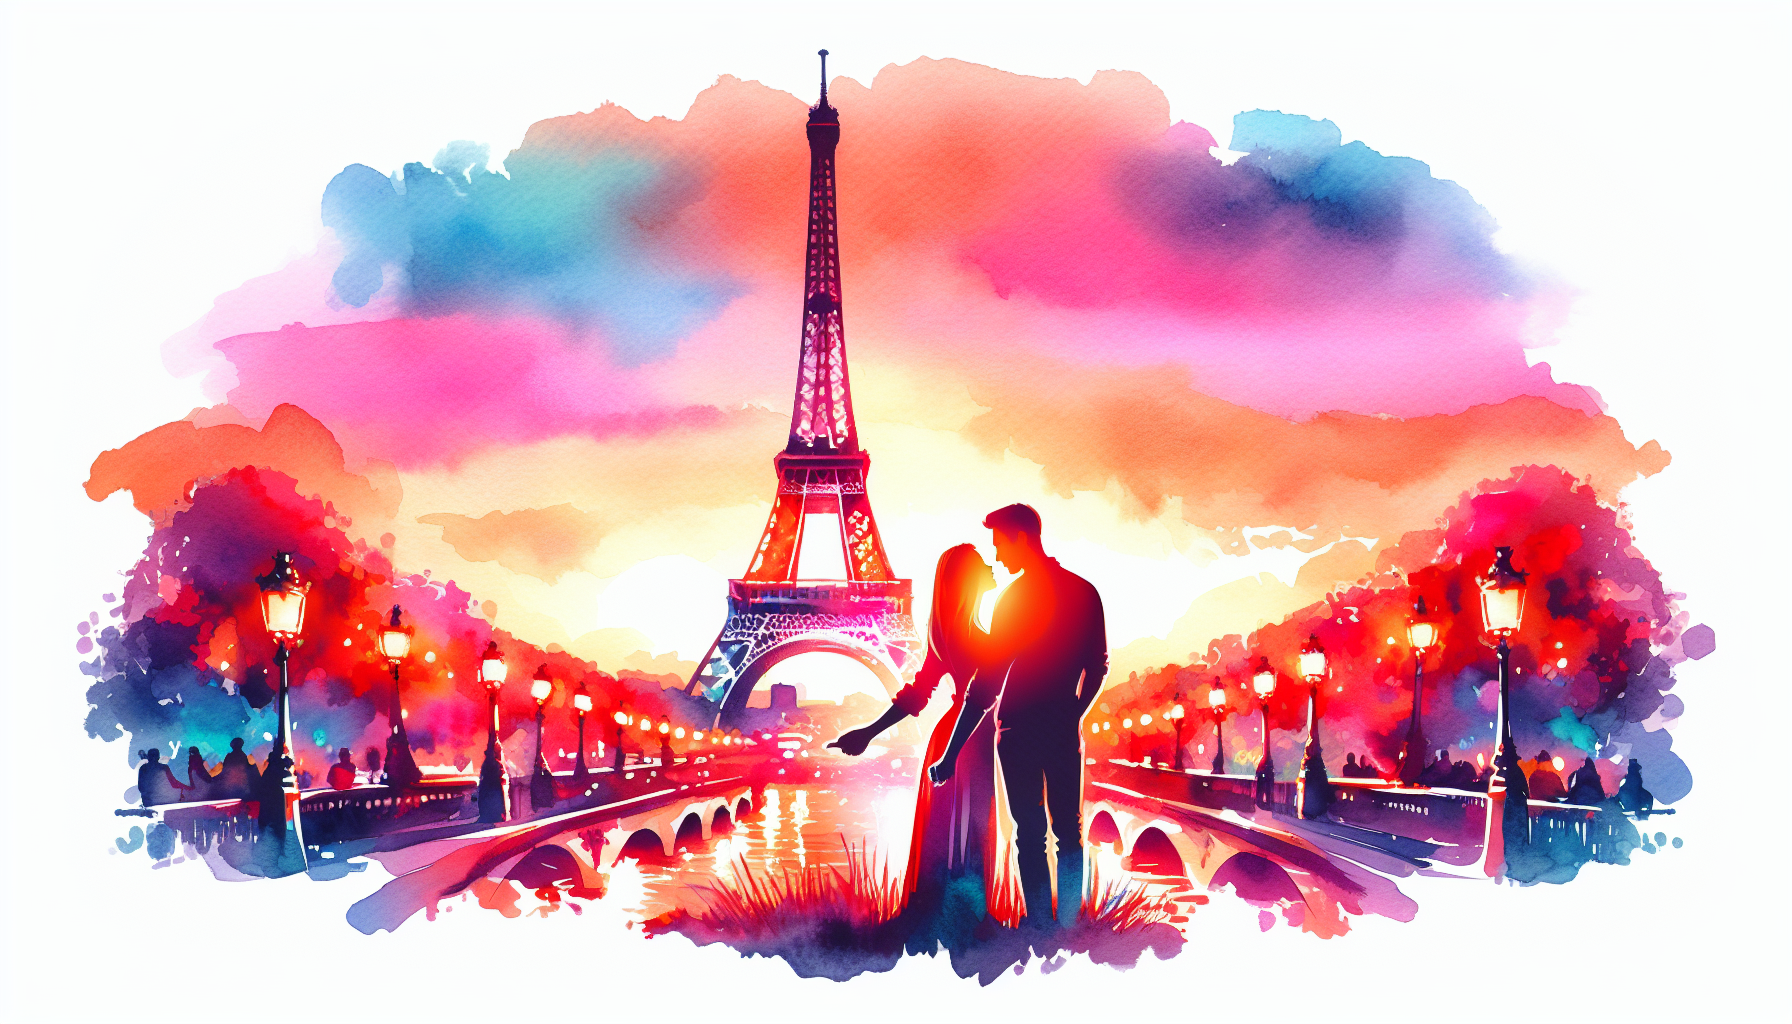 Create an image of a picturesque sunset by the Eiffel Tower with a couple holding hands, reflecting a romantic movie scene, capturing both the grandeur of the location and the intimacy of the moment,